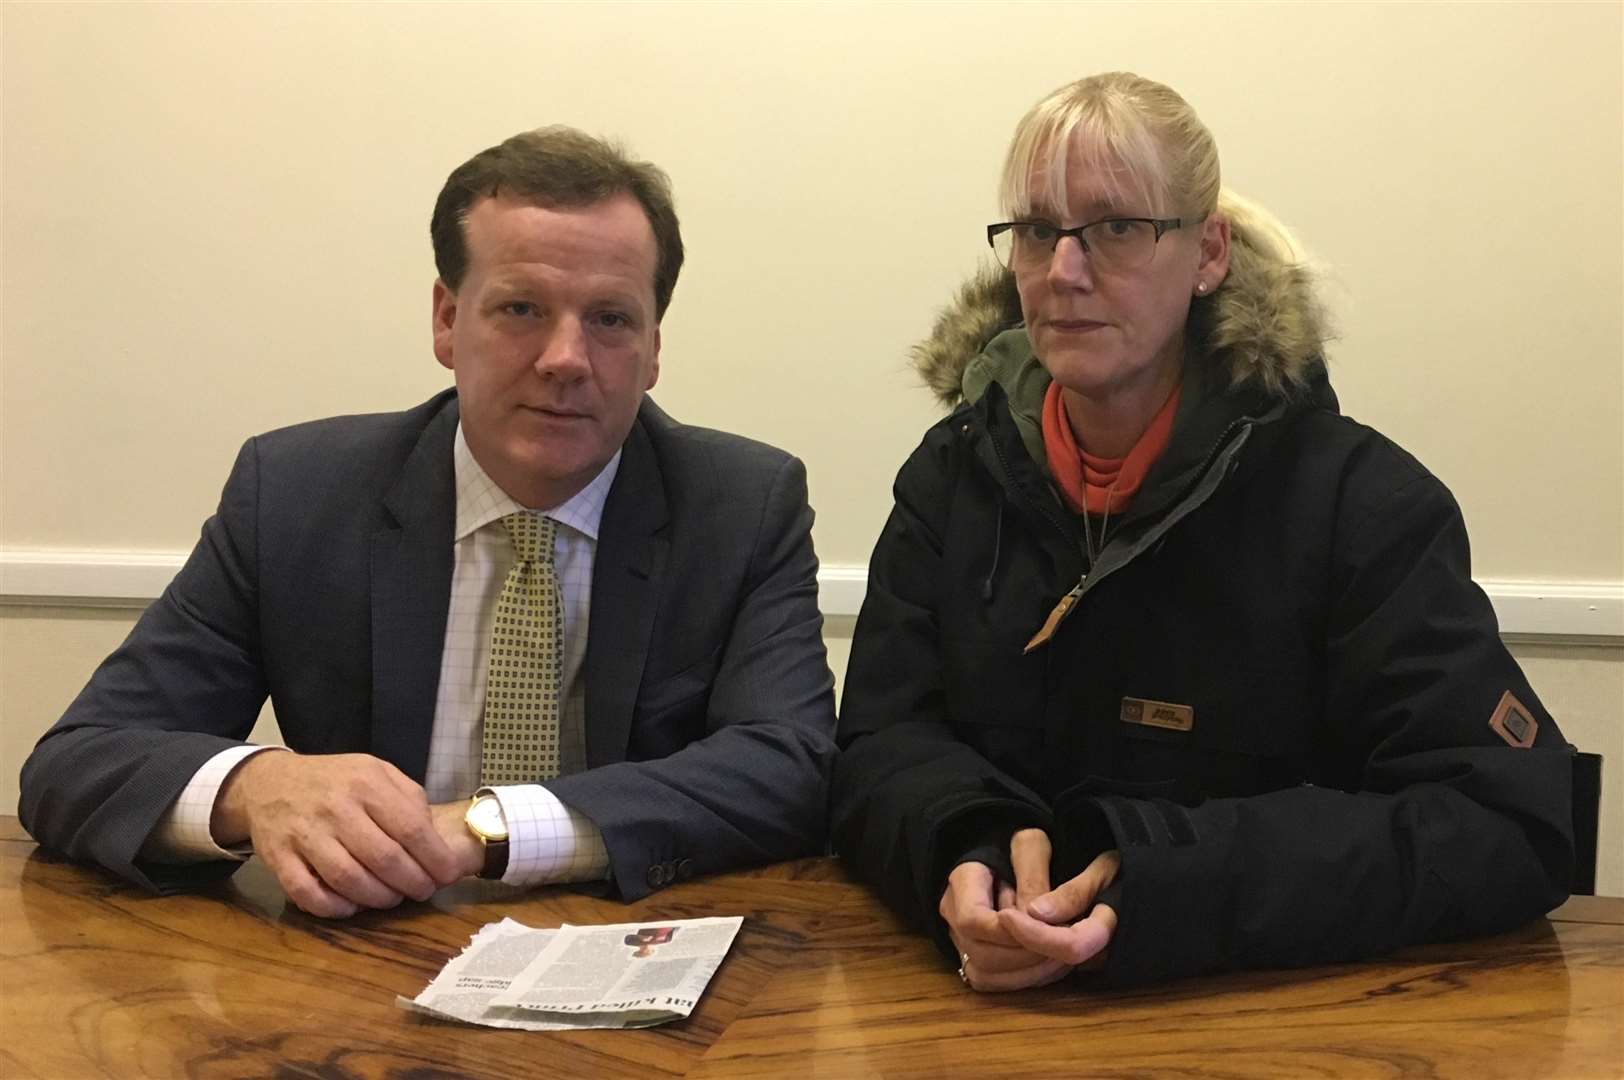 Charlie Elphicke and Michelle Fraser